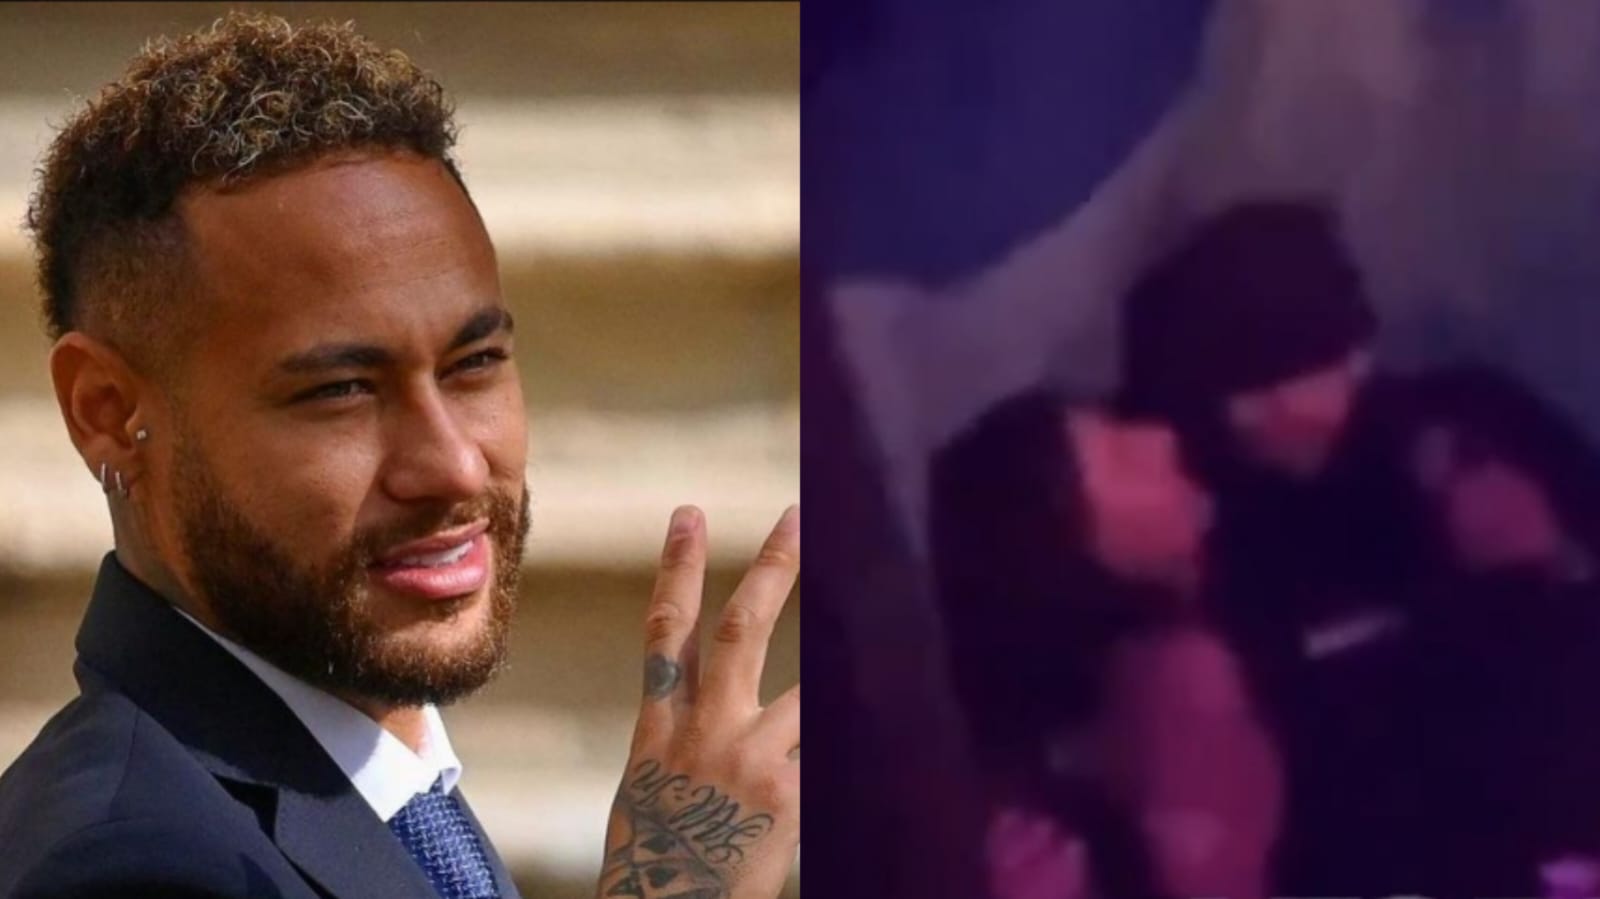 Busted!  Neymar enjoys a night out in Spain with two women, reveals Leo Dias